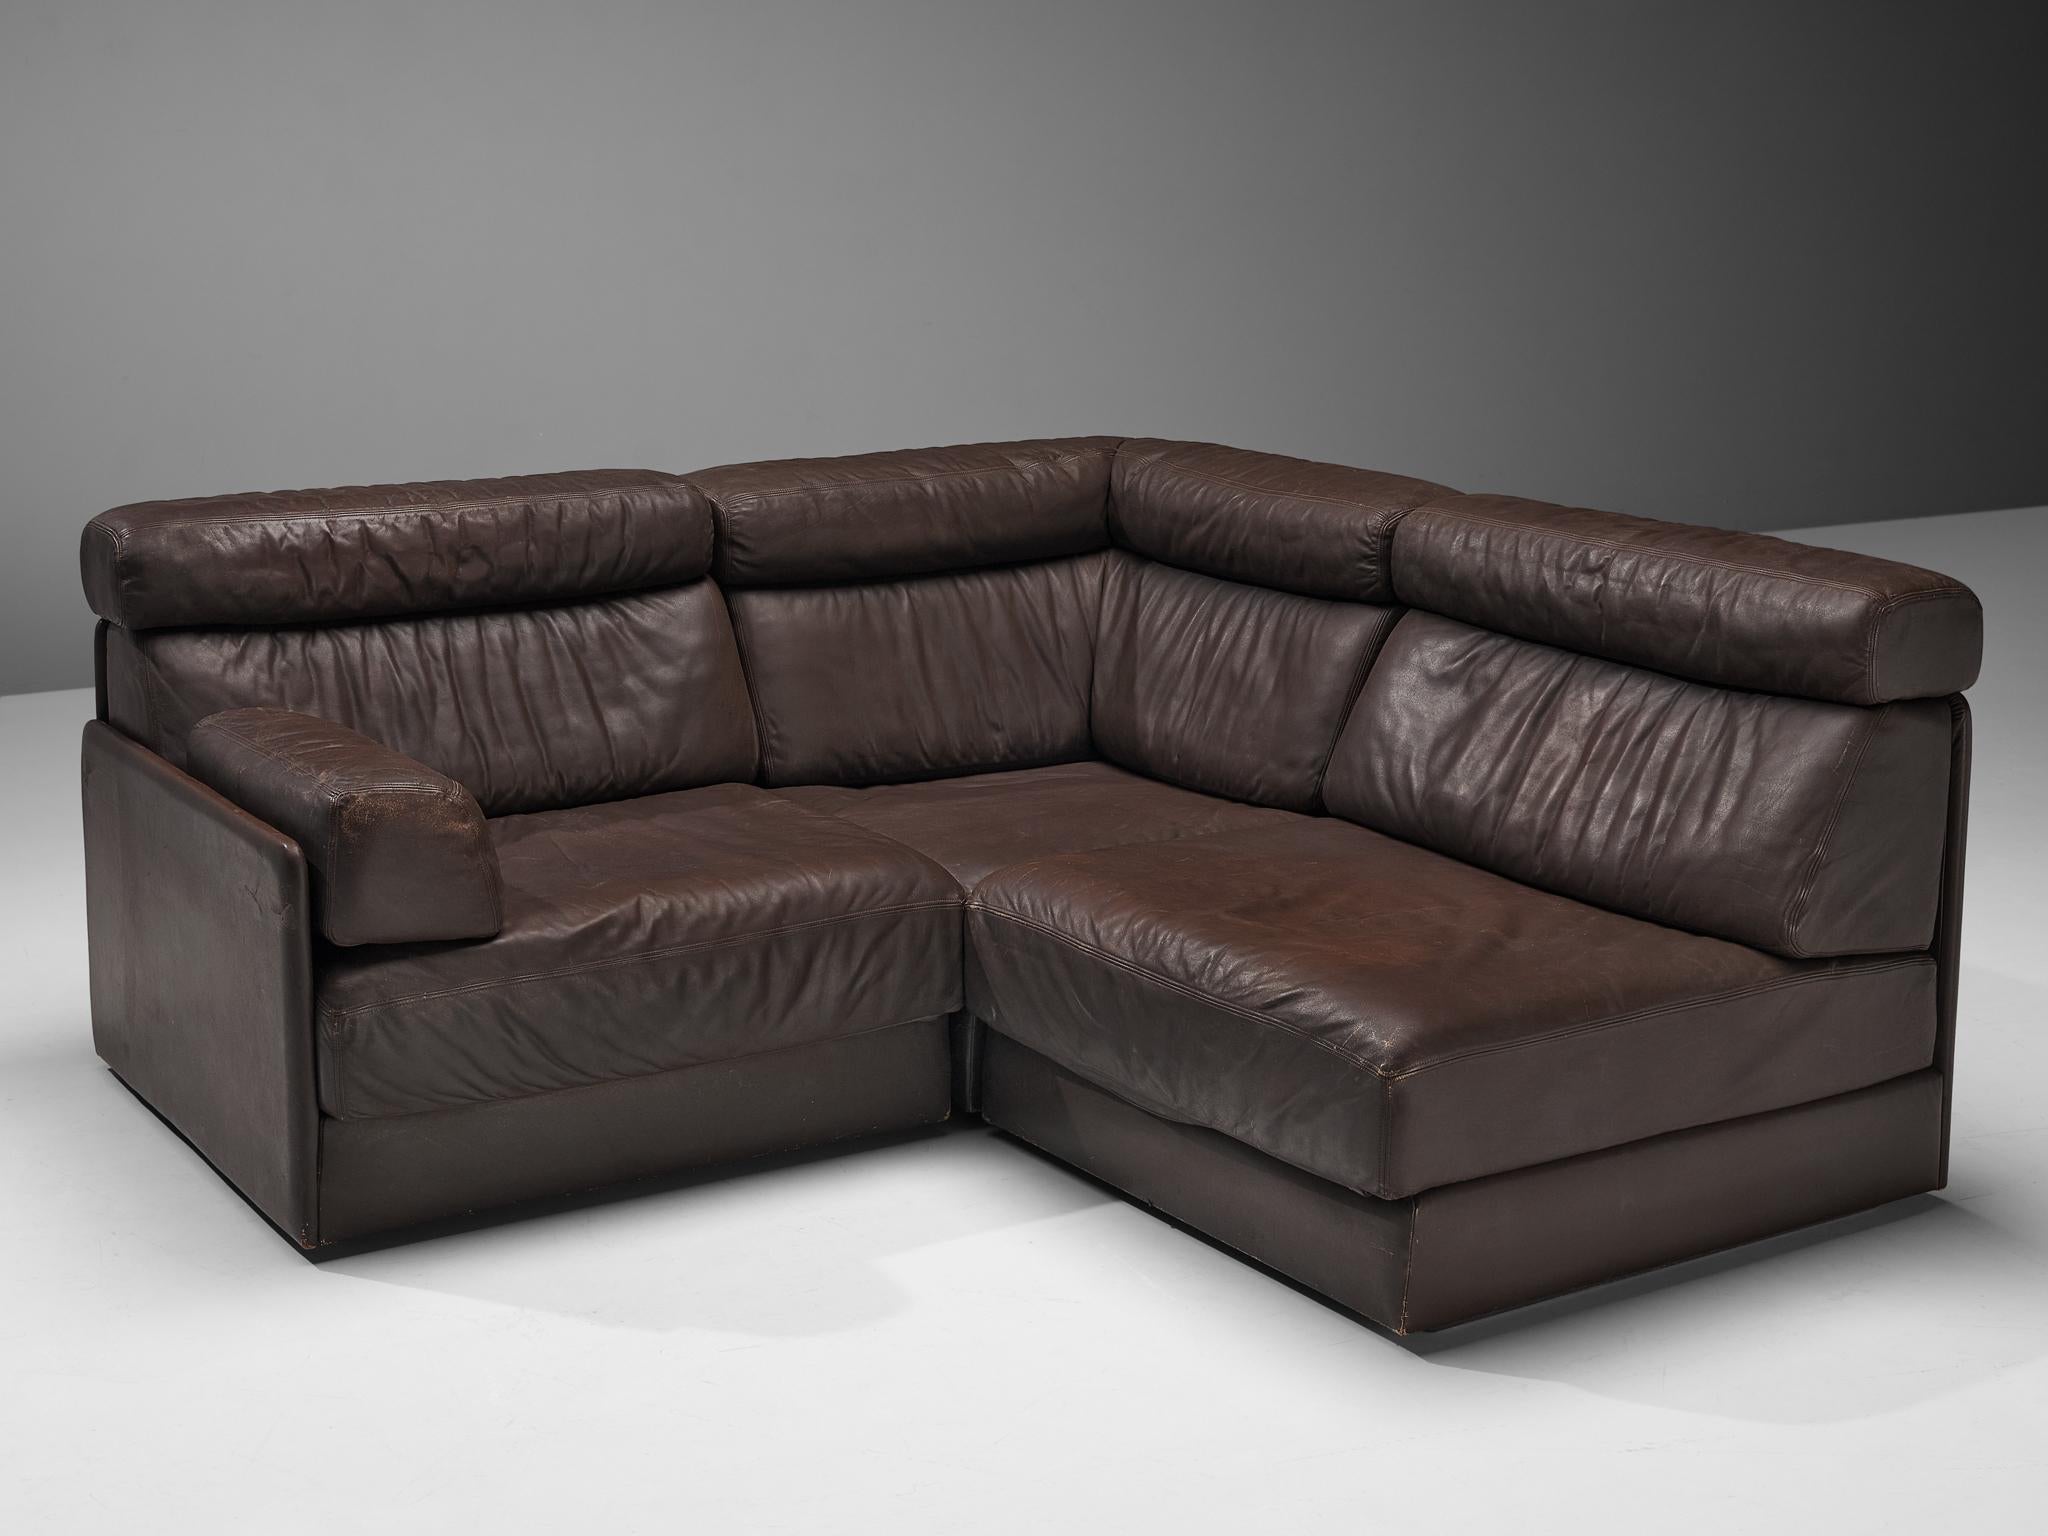 De Sede, sectional sofa model ‘DS-76’, leather, Switzerland, 1970s

This high quality sectional sofa designed by De Sede in the 1970s contains one corner element and two normal elements and, together with two moveable cushions, making it possible to